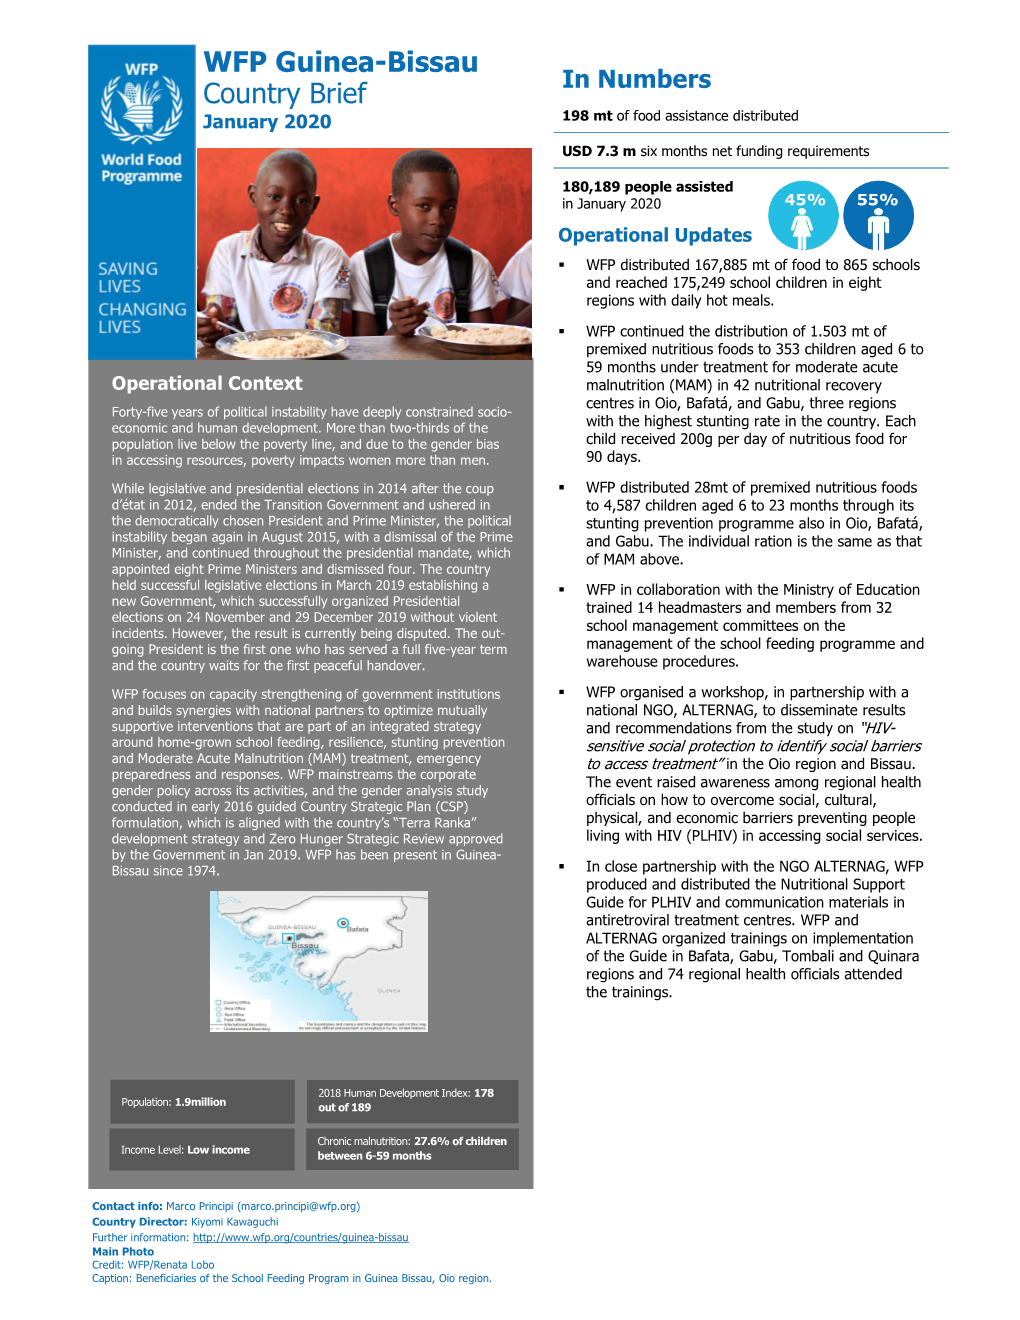 WFP Guinea-Bissau Country Brief January 2020